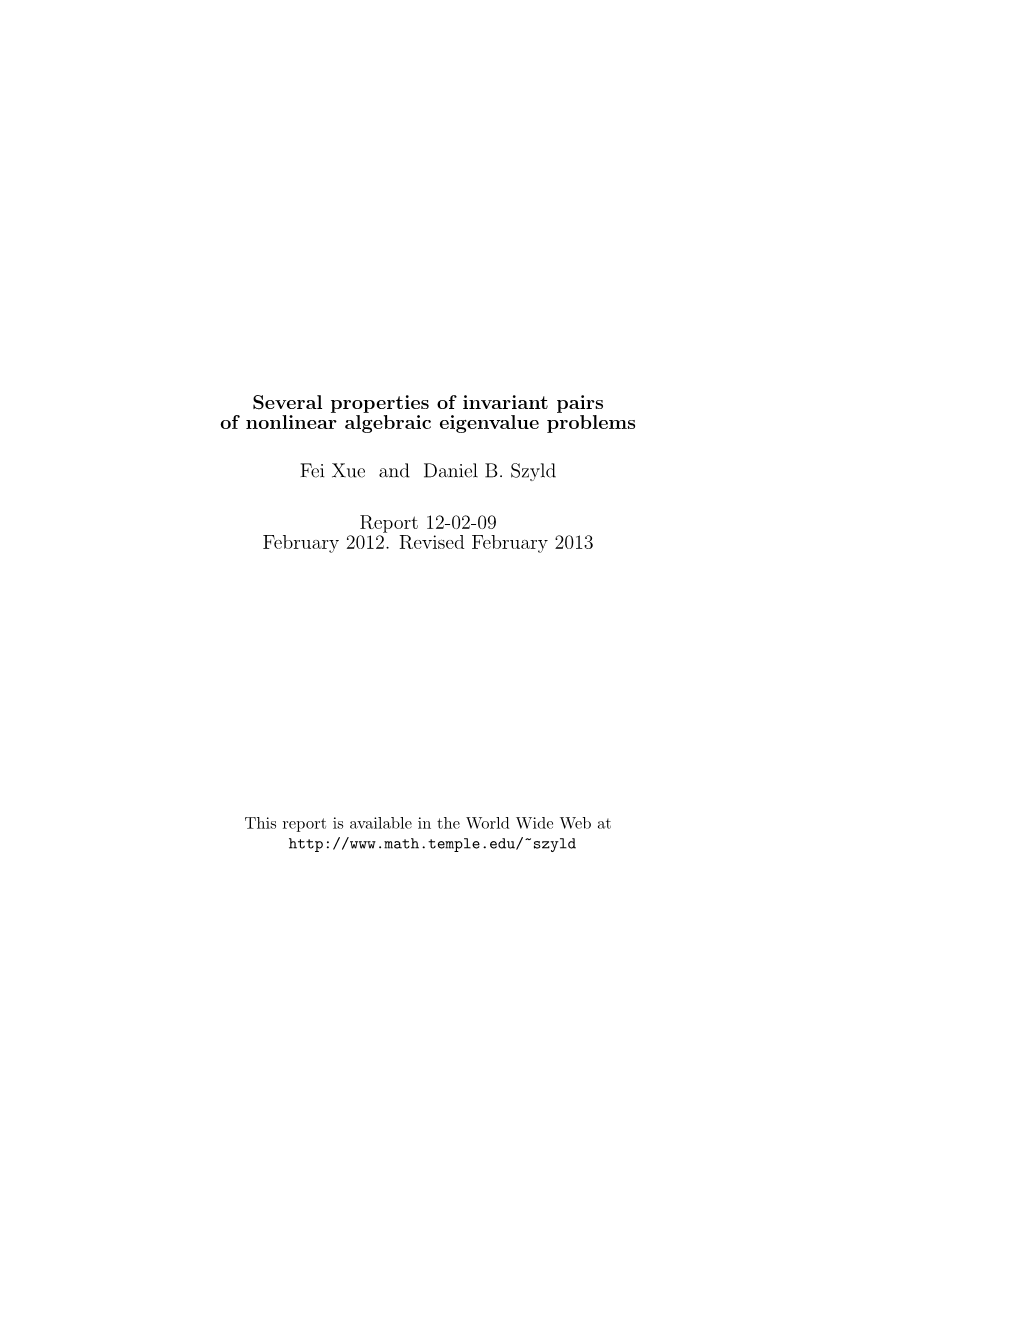 Several Properties of Invariant Pairs of Nonlinear Algebraic Eigenvalue Problems